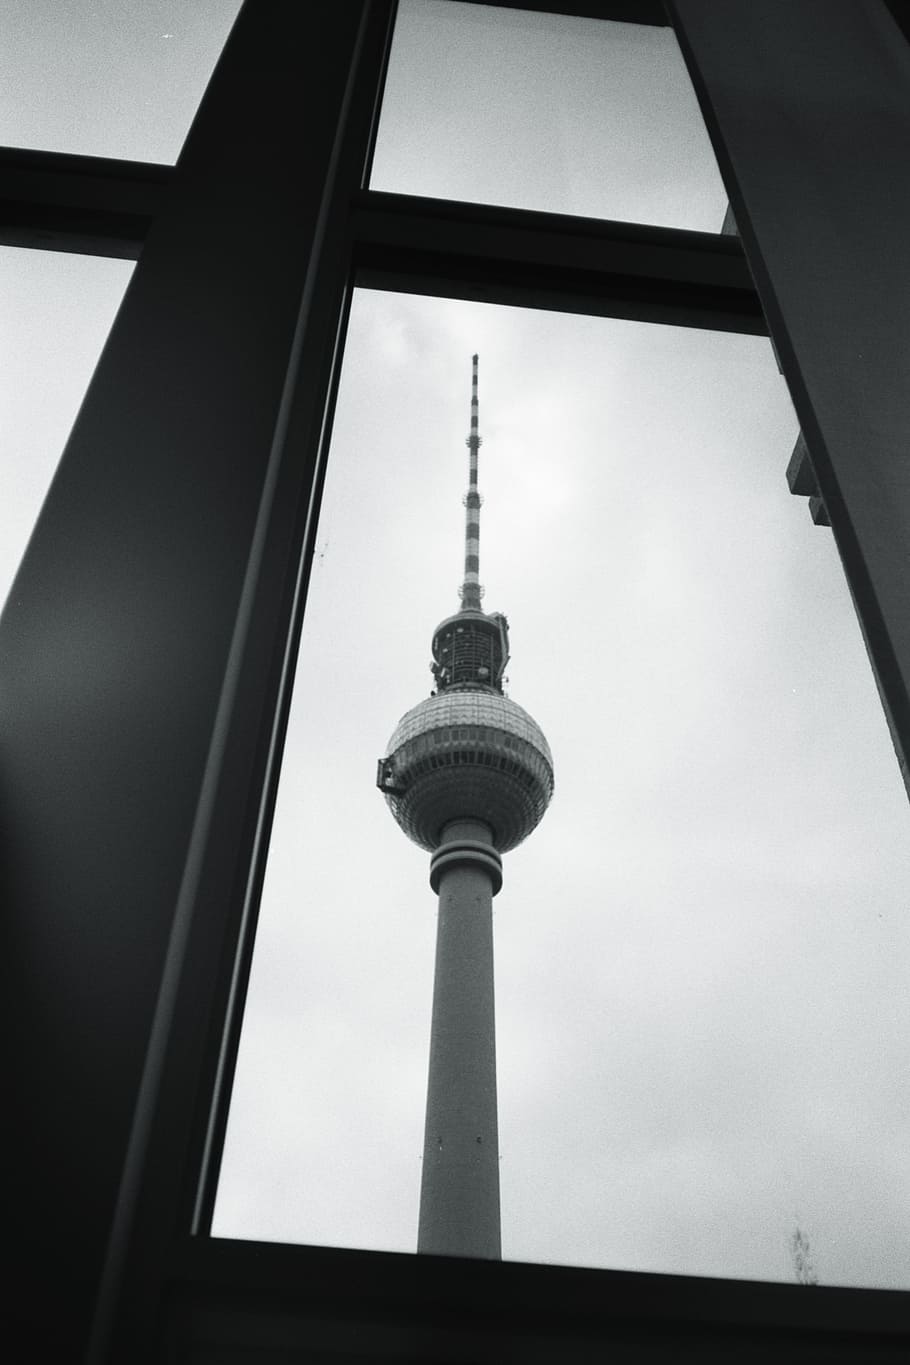 berlin, tv tower, window, black and white, architecture, germany, alexanderplatz, places of interest, landmark, tower